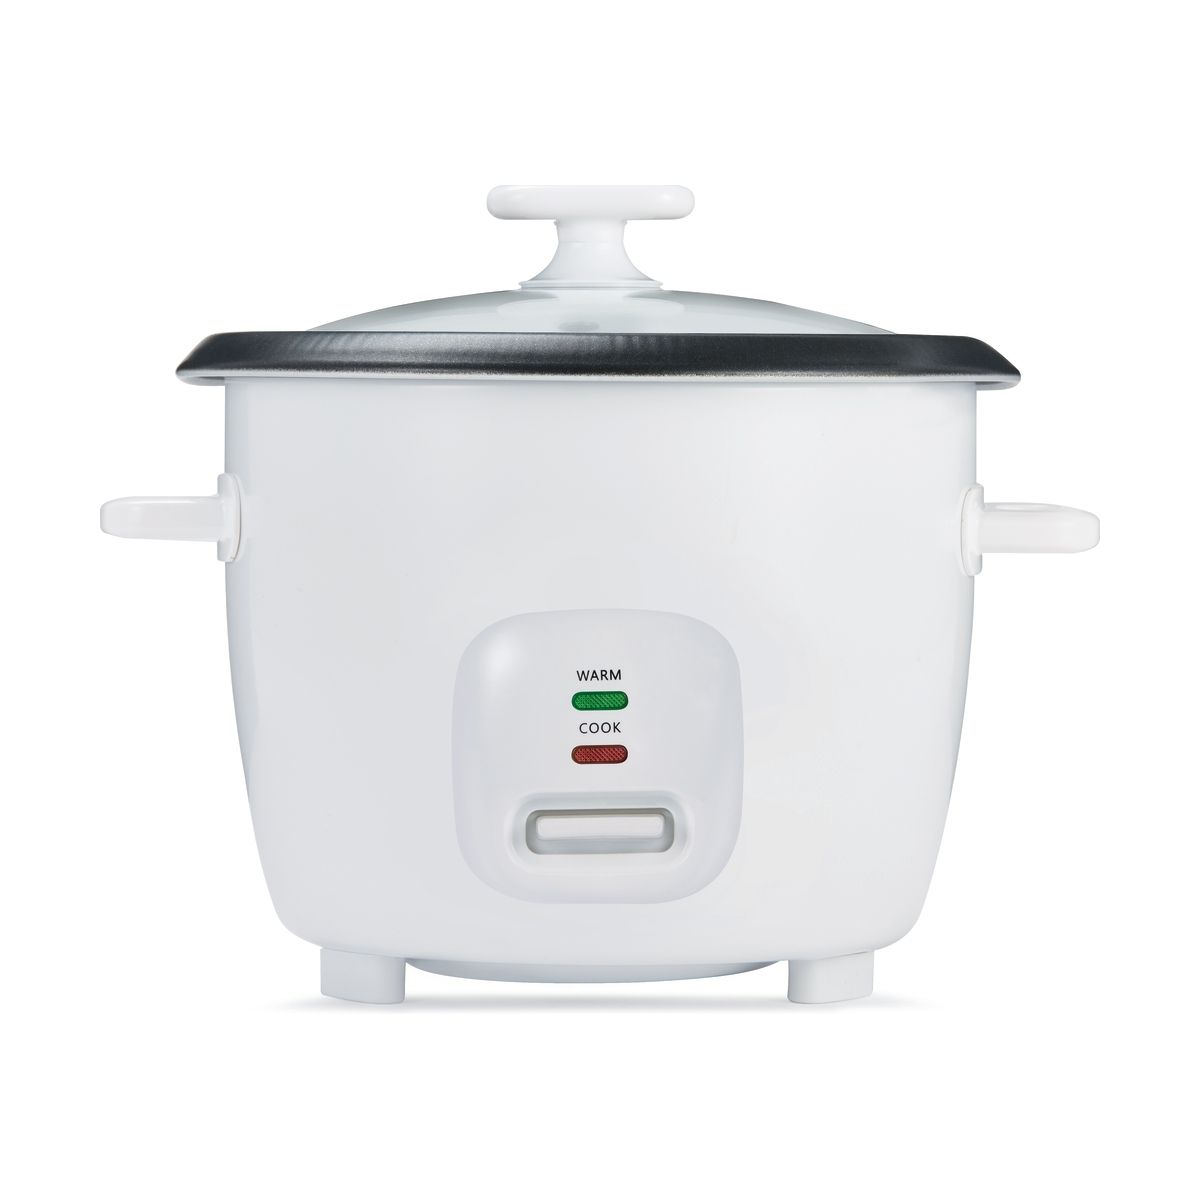 3 Cup Rice Cooker Kmart